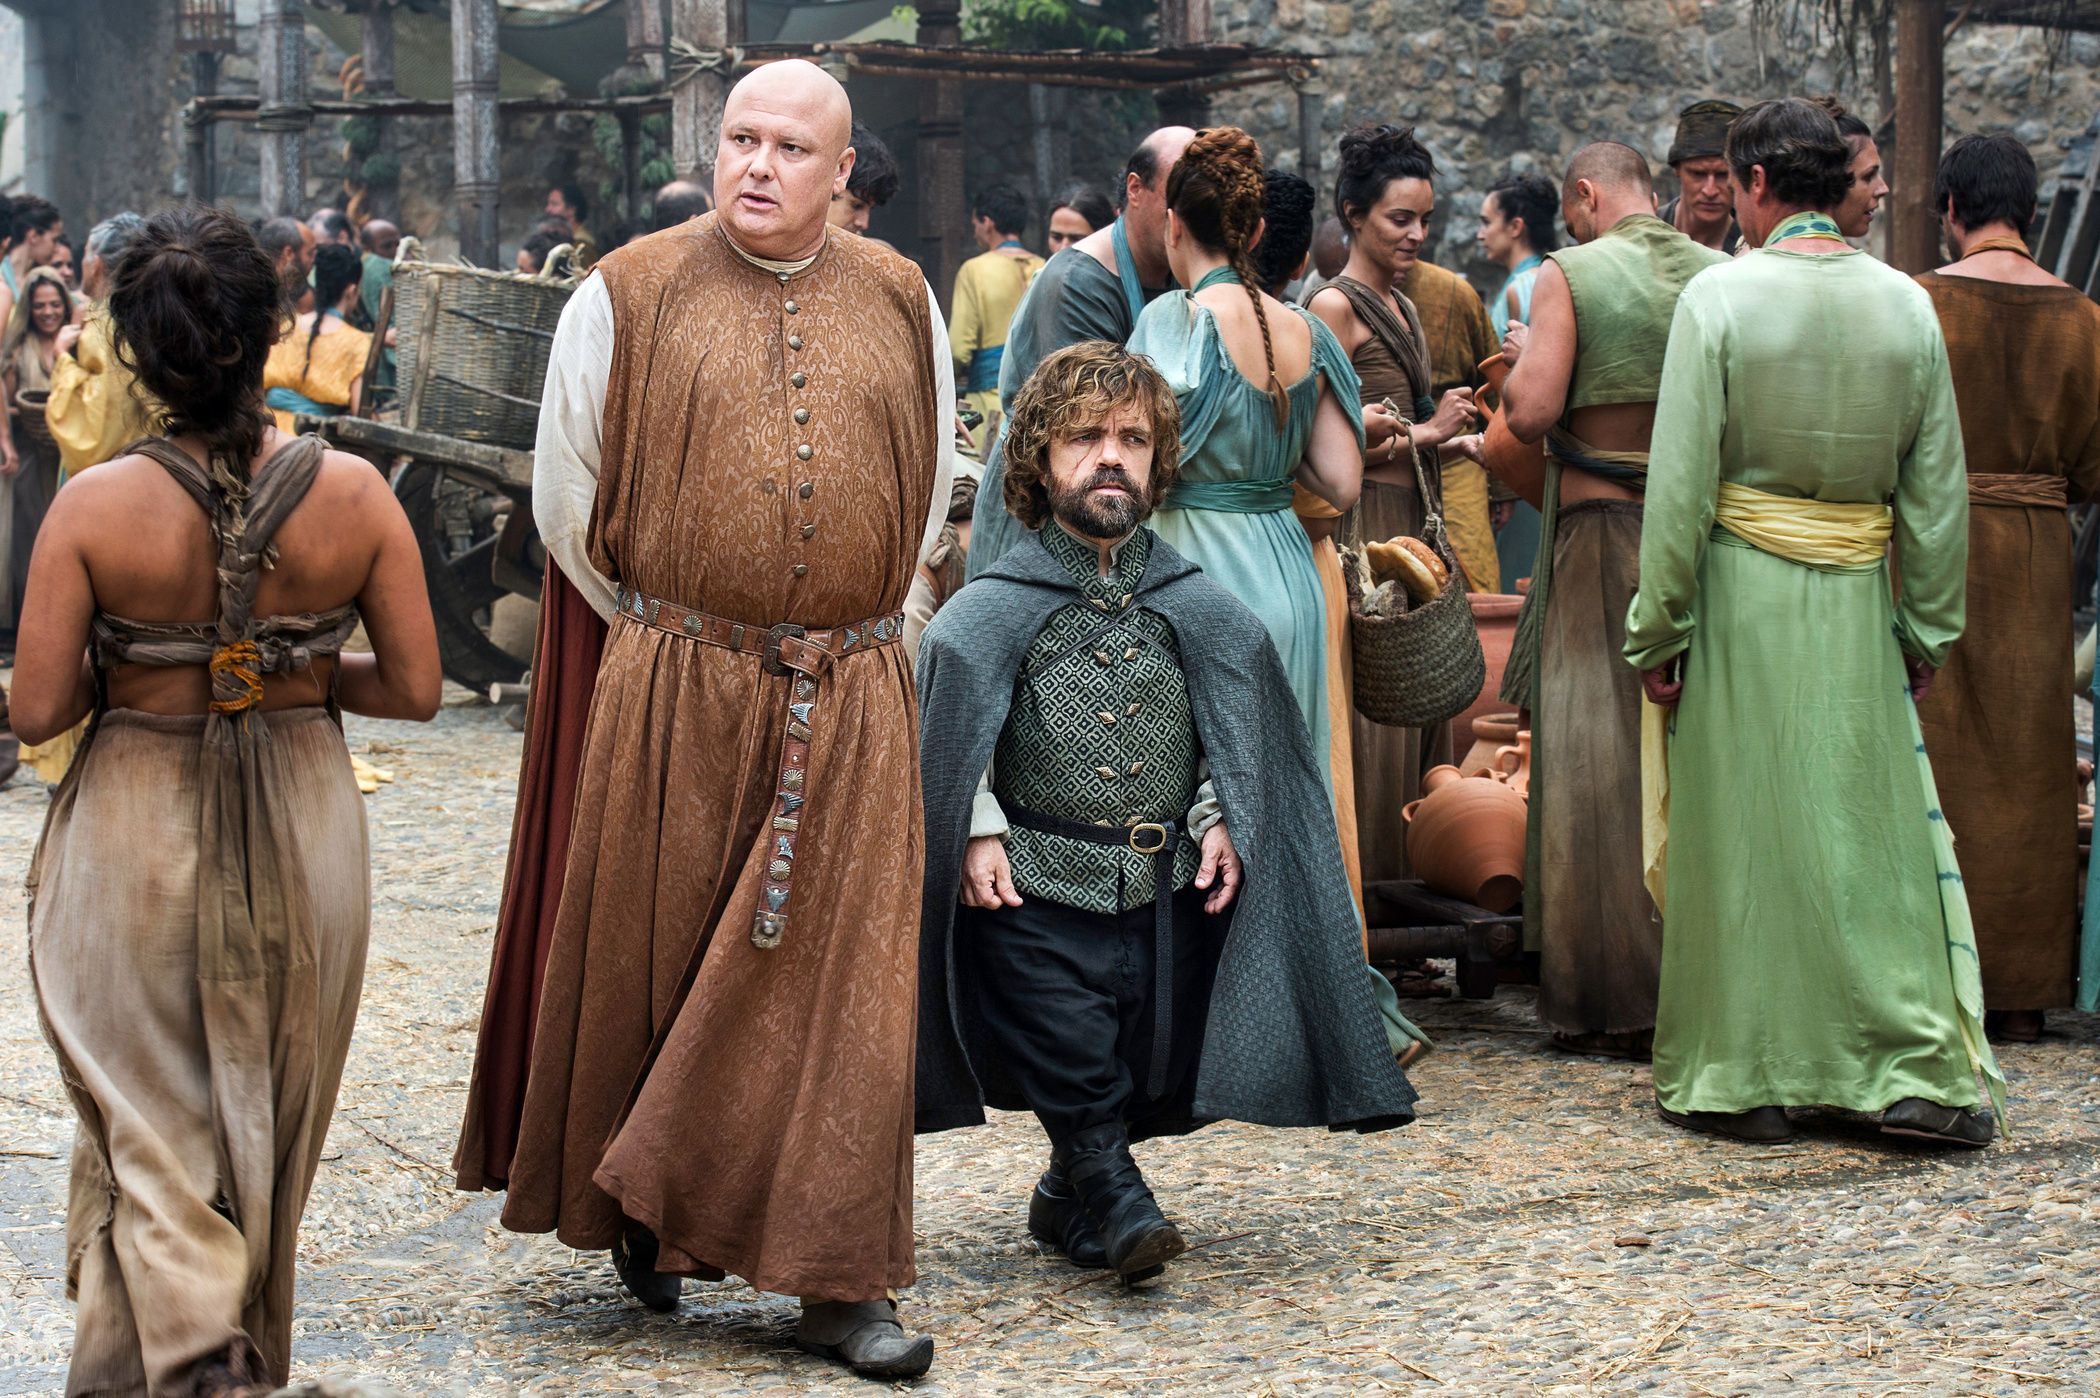 Conleth Hill as Varys and Peter Dinklage as Tyrion Lannister Game of Thrones Season 6